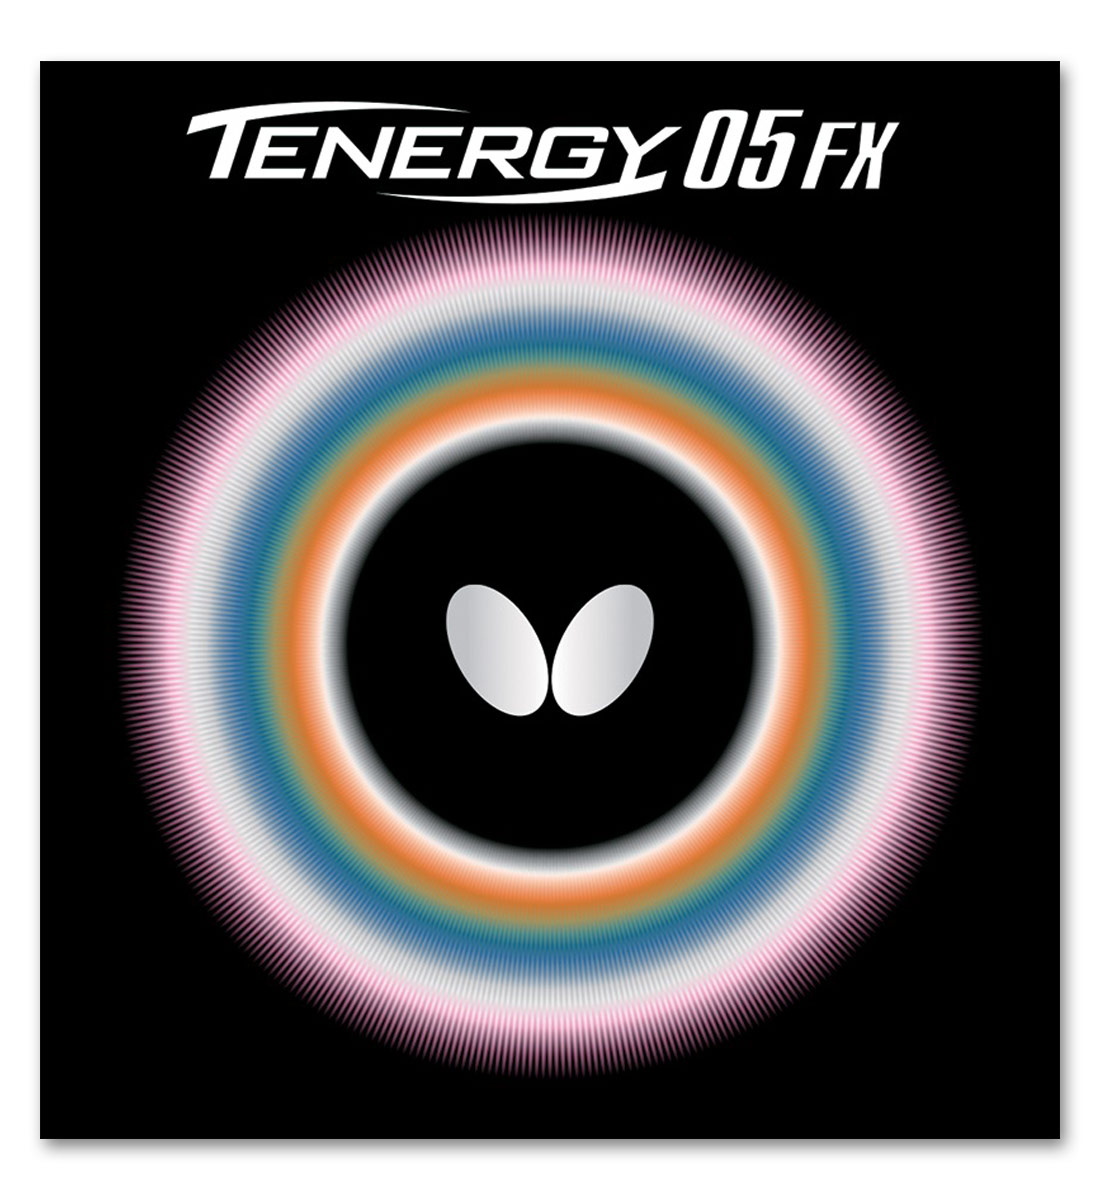 Butterfly Tenergy 05 FX Questions & Answers